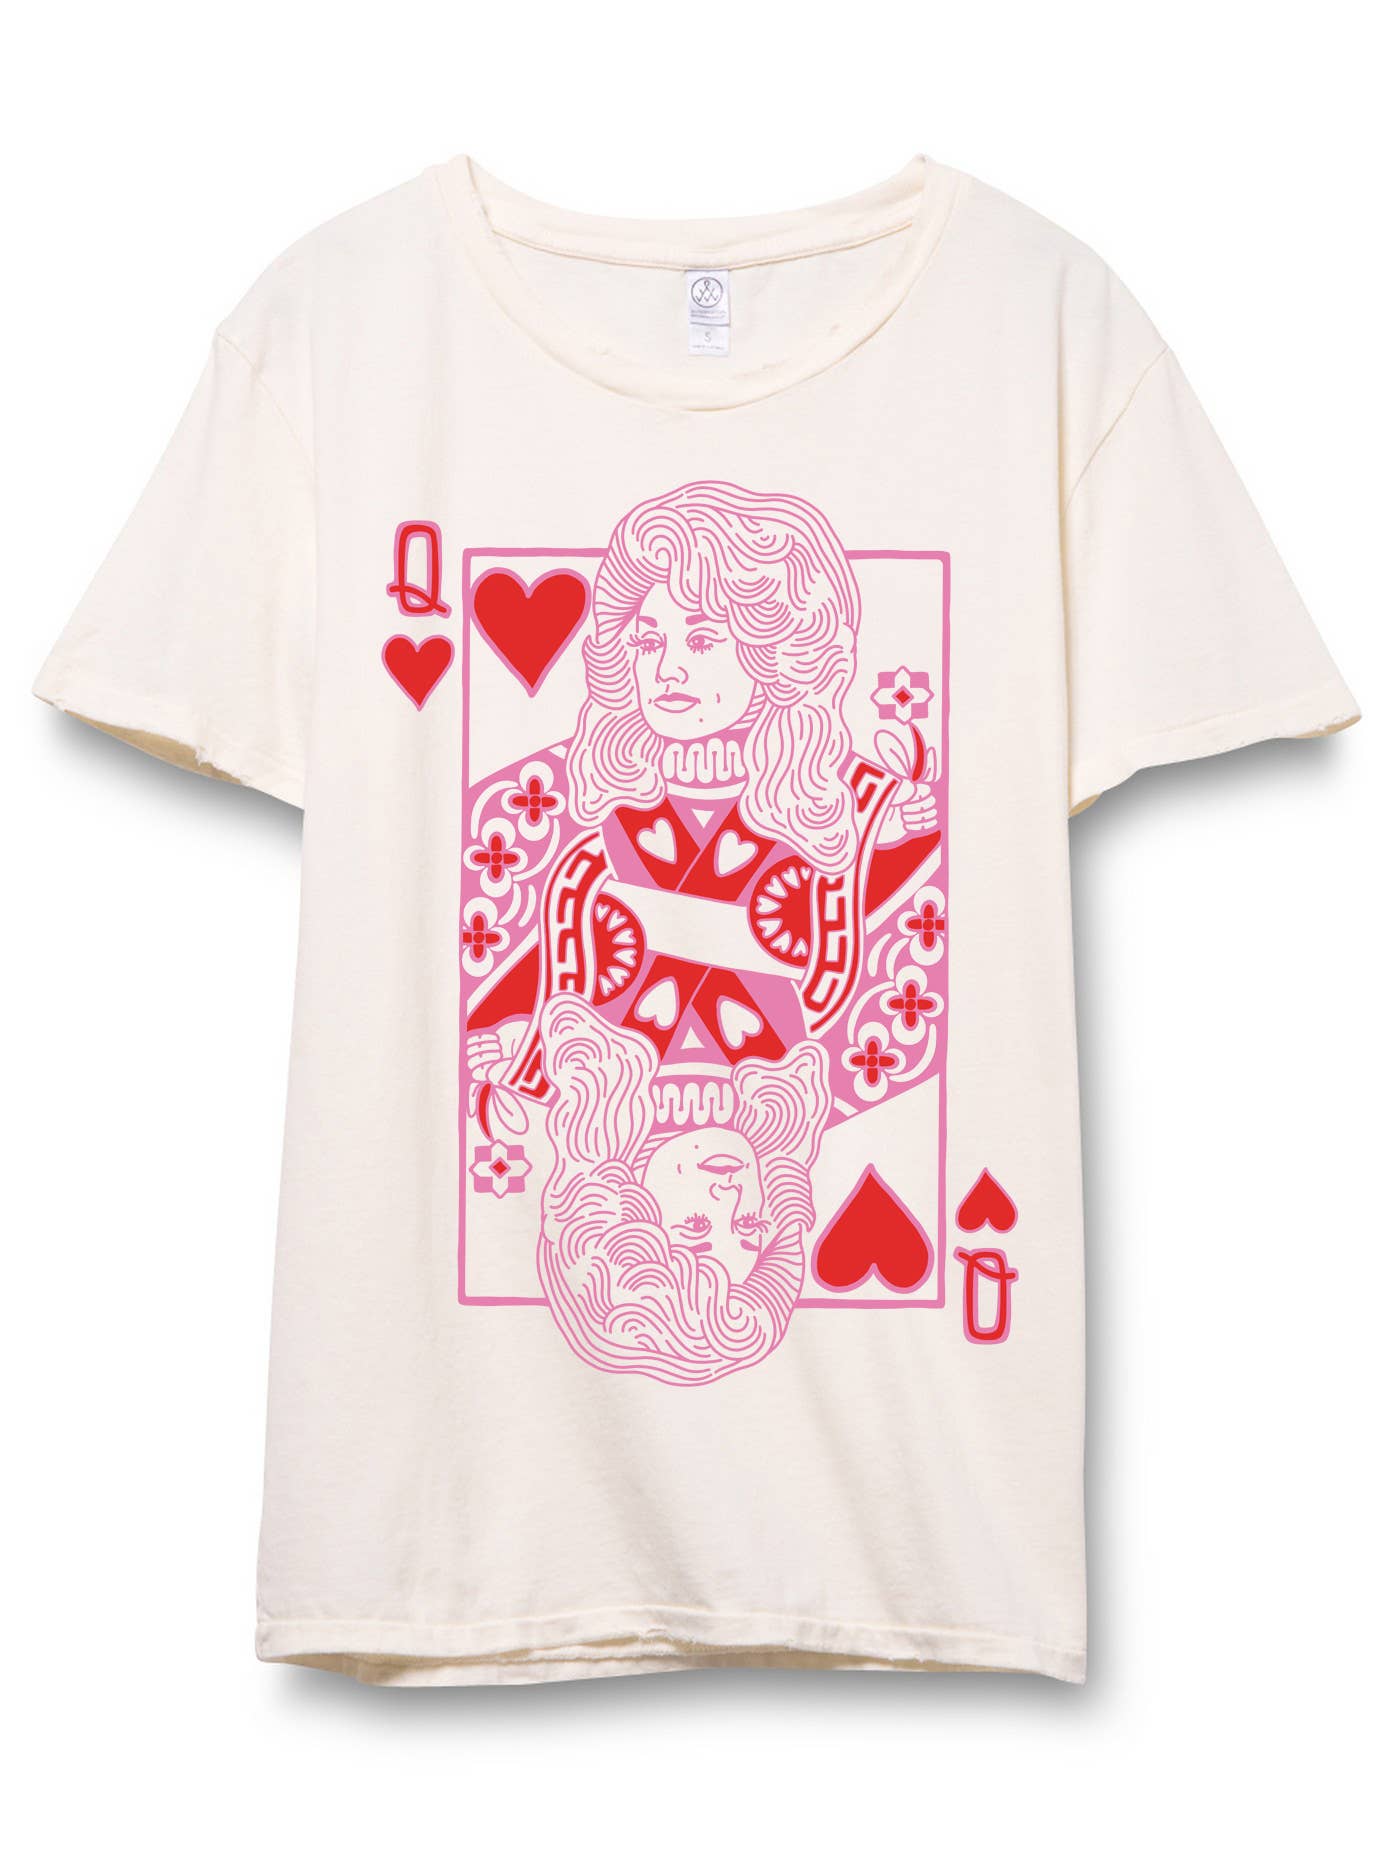 Queen of Hearts Dolly Distressed Unisex Tee